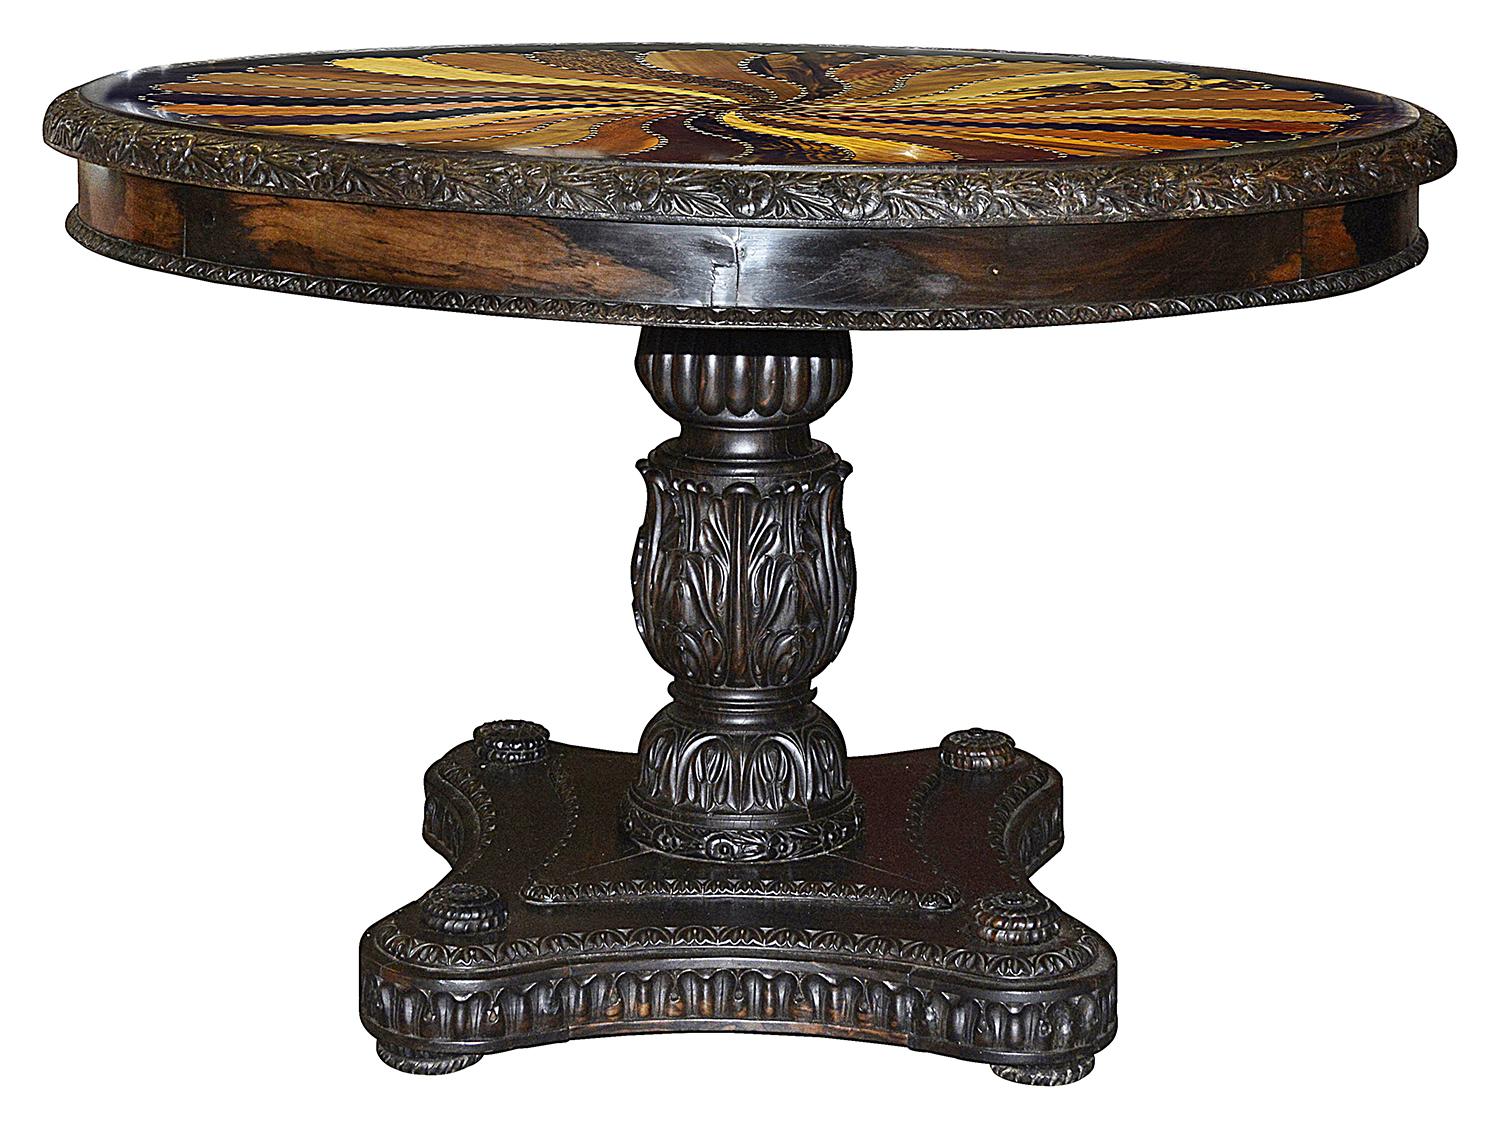 A wonderful and rare mid 19th century Ceylonese specimen native wood centre table, set in an Ebony boarder, the base having hand carved foliate and motif decoration. The top having with radiating veneers of Satinwood, Ebony, Rosewood, Pol-Coconut,